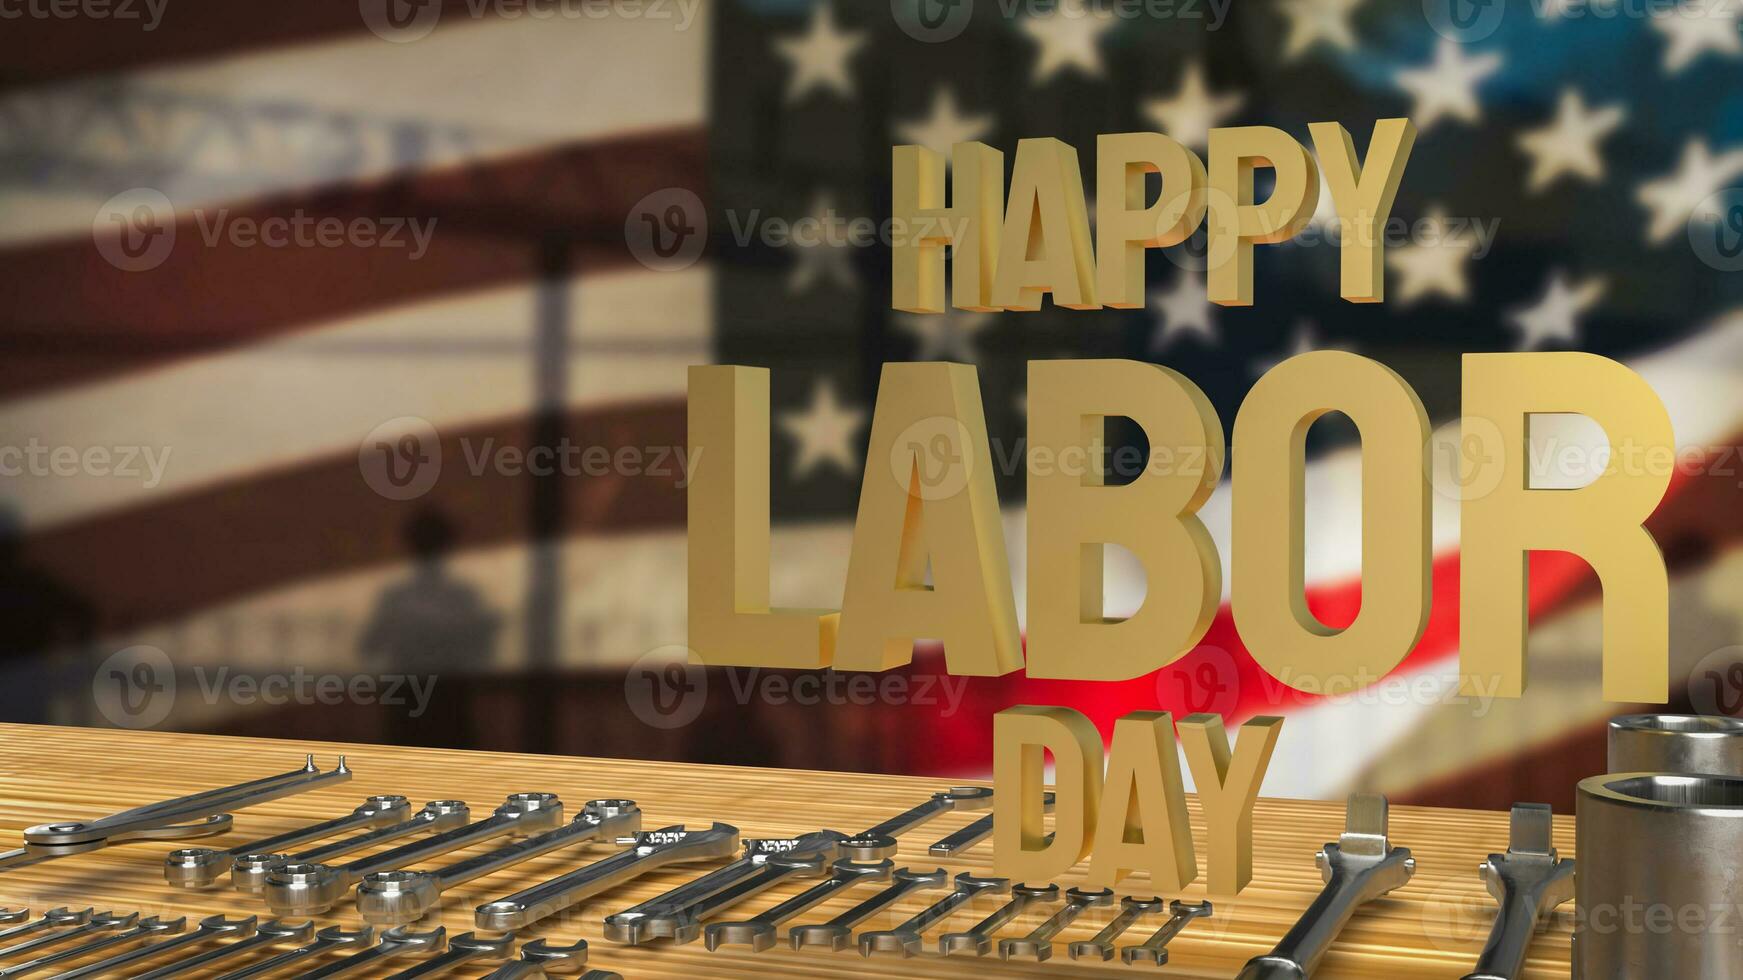 The Happy Labor Day for holiday concept 3d rendering photo